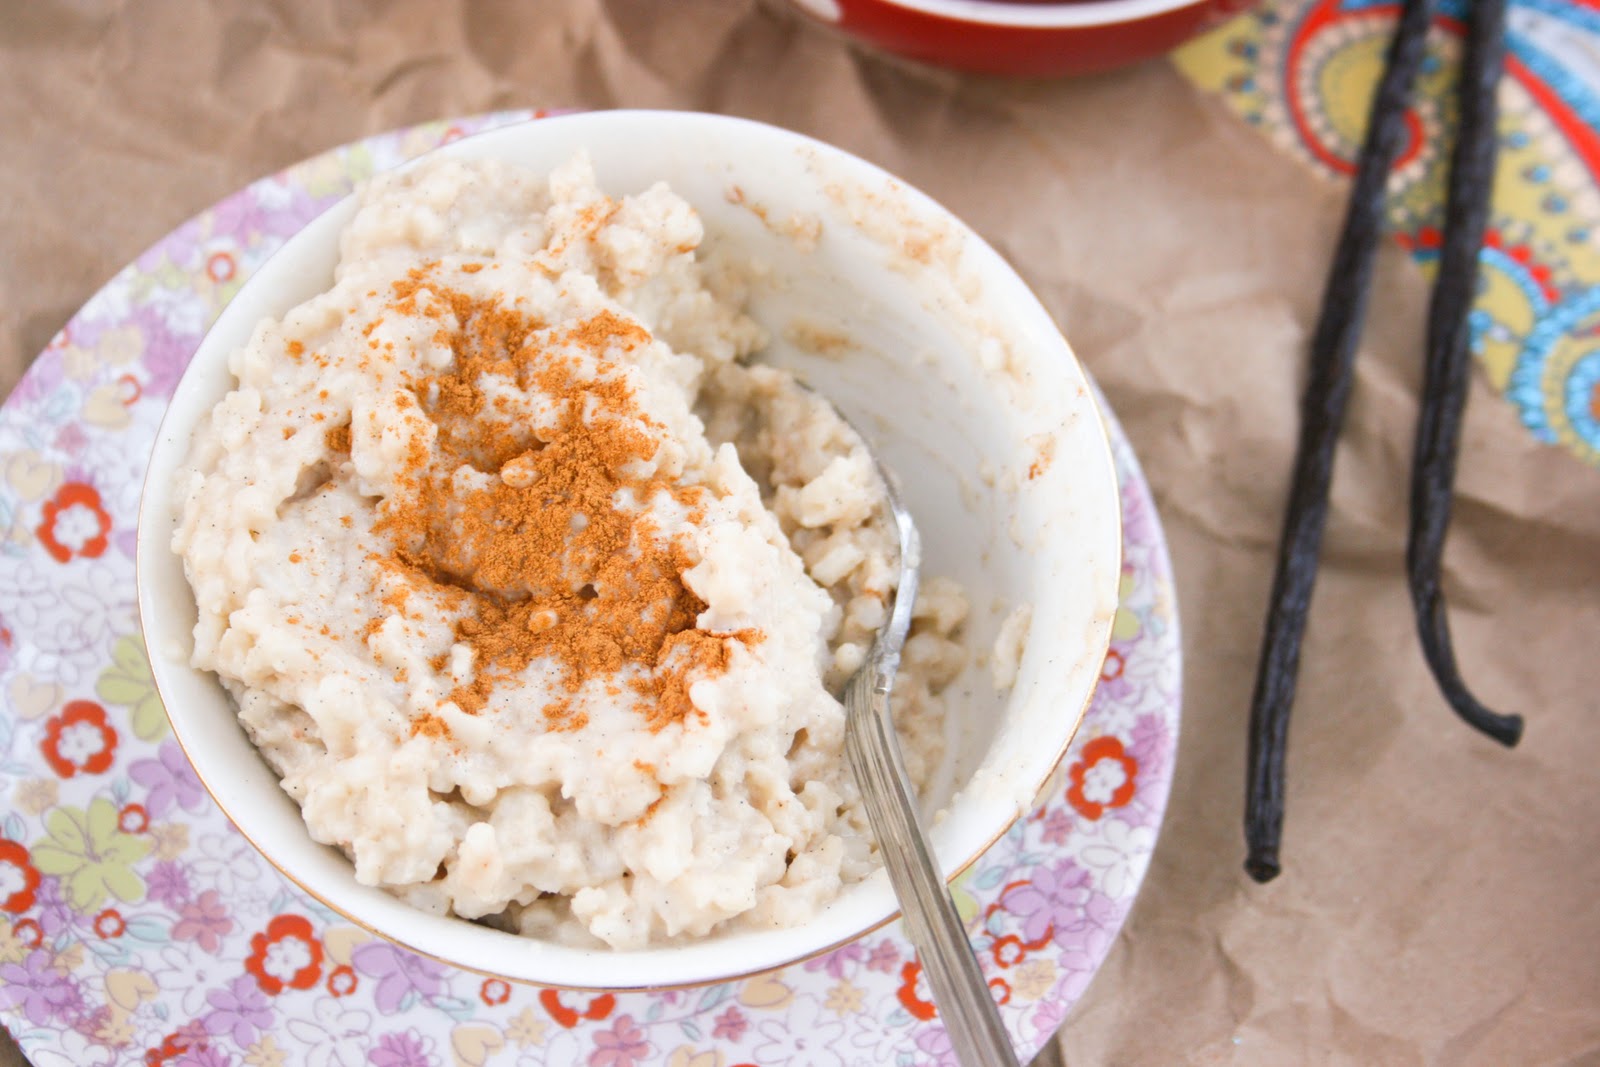 Coconut Milk Rice Pudding (she: Krissy) - Or so she says...